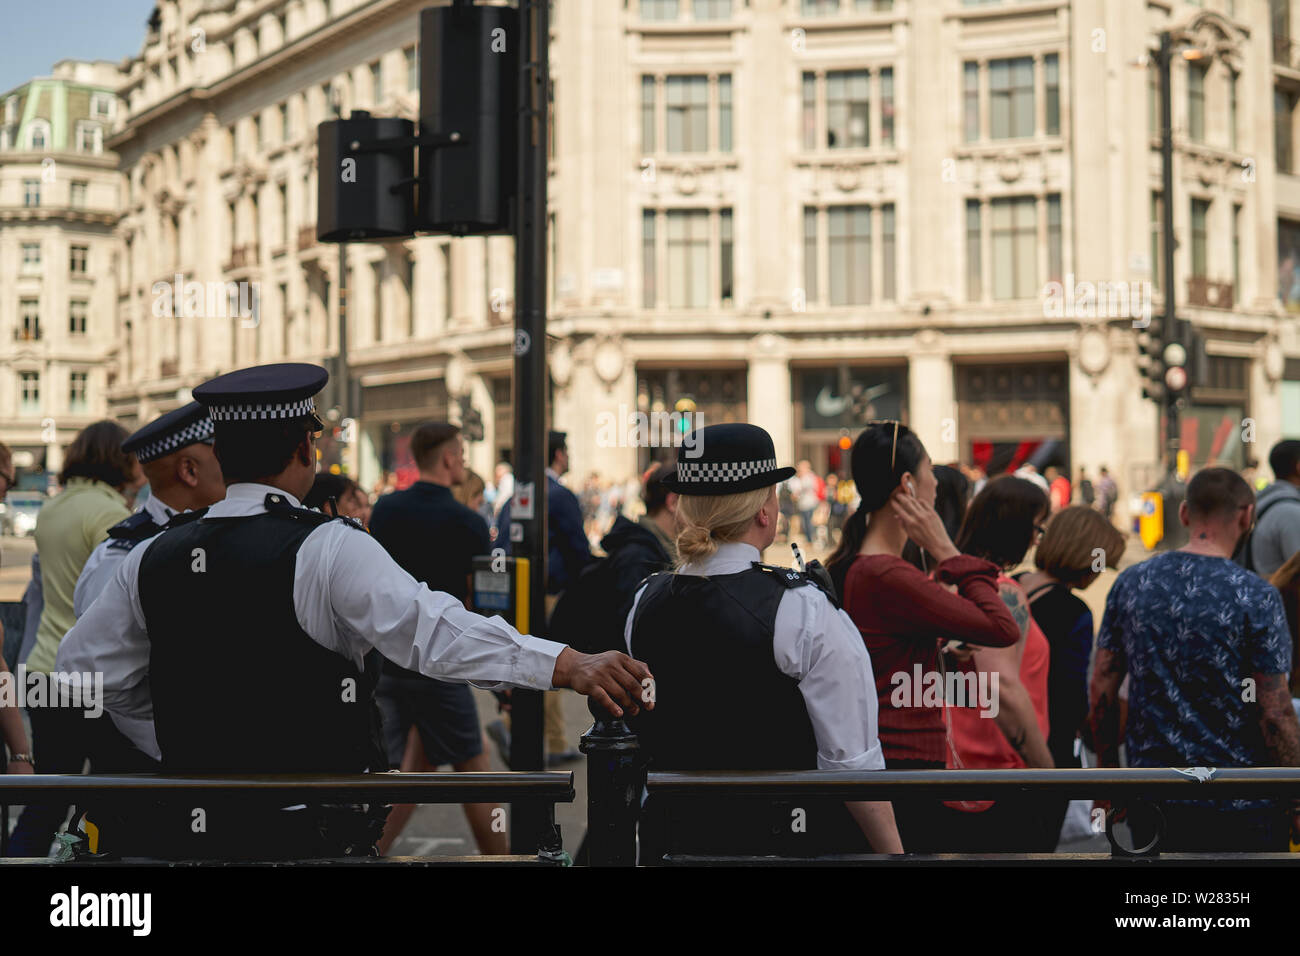 London, UK - June, 2019. Police officers patrolling Oxford Circus in central London. Stock Photo